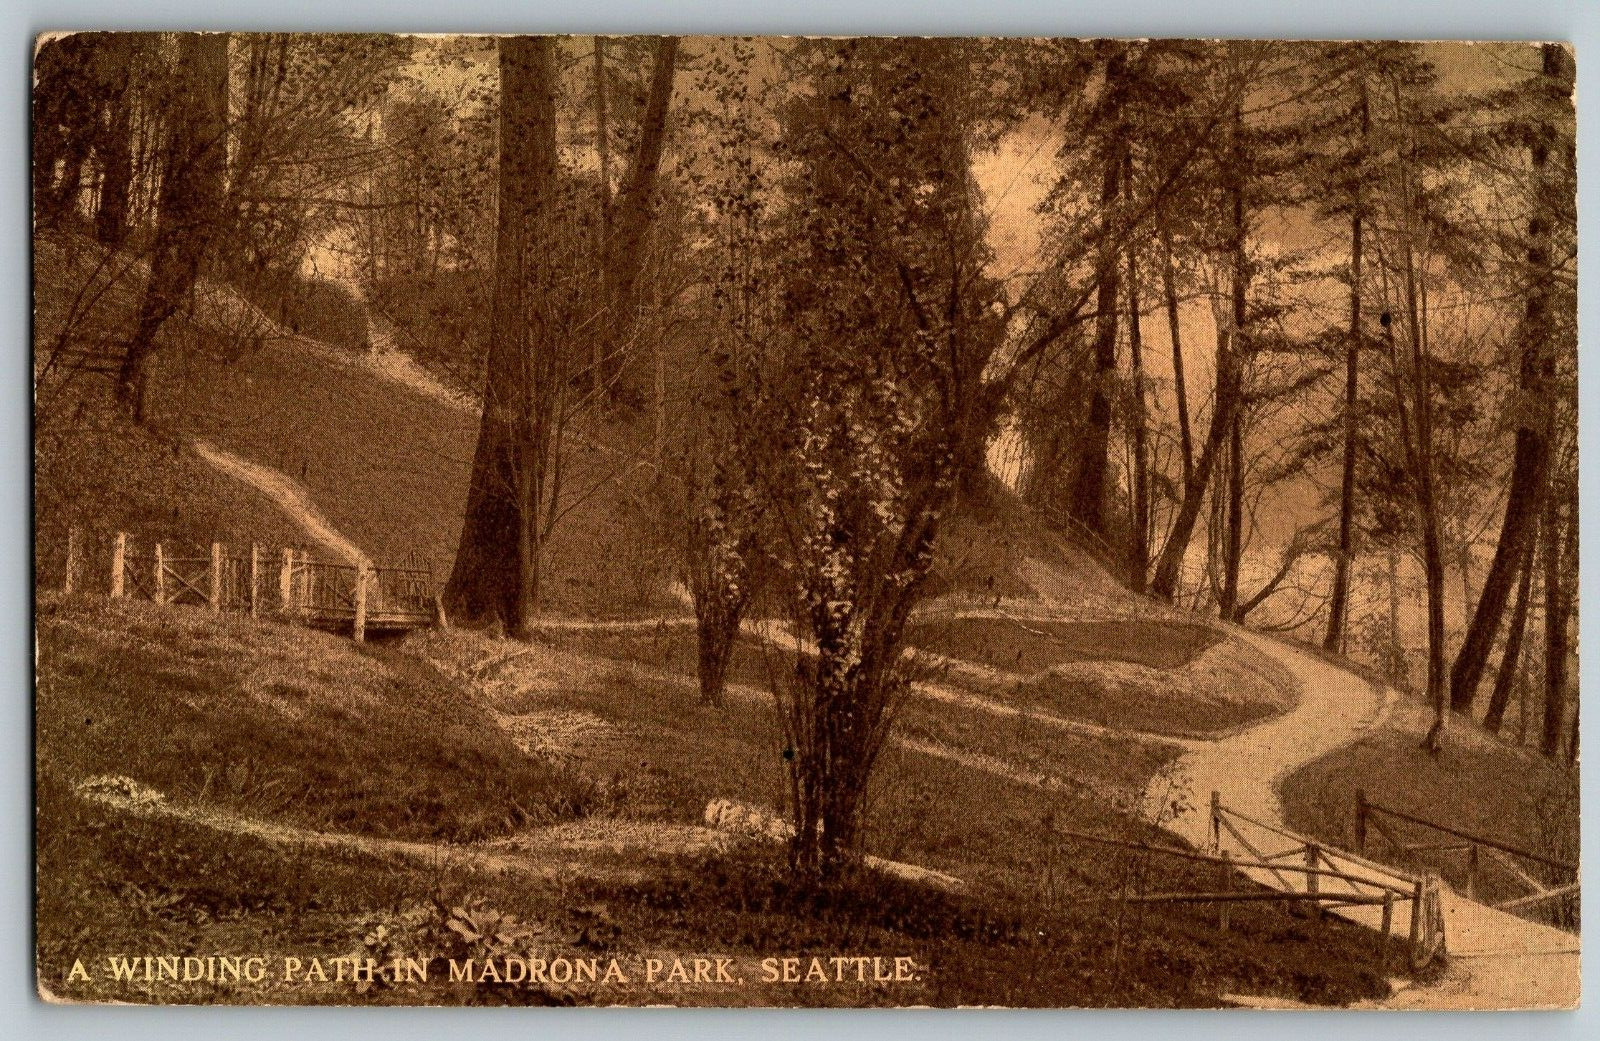 Seattle, Washington - A Winding Path in Madrona Park - Vintage Postcard - Posted